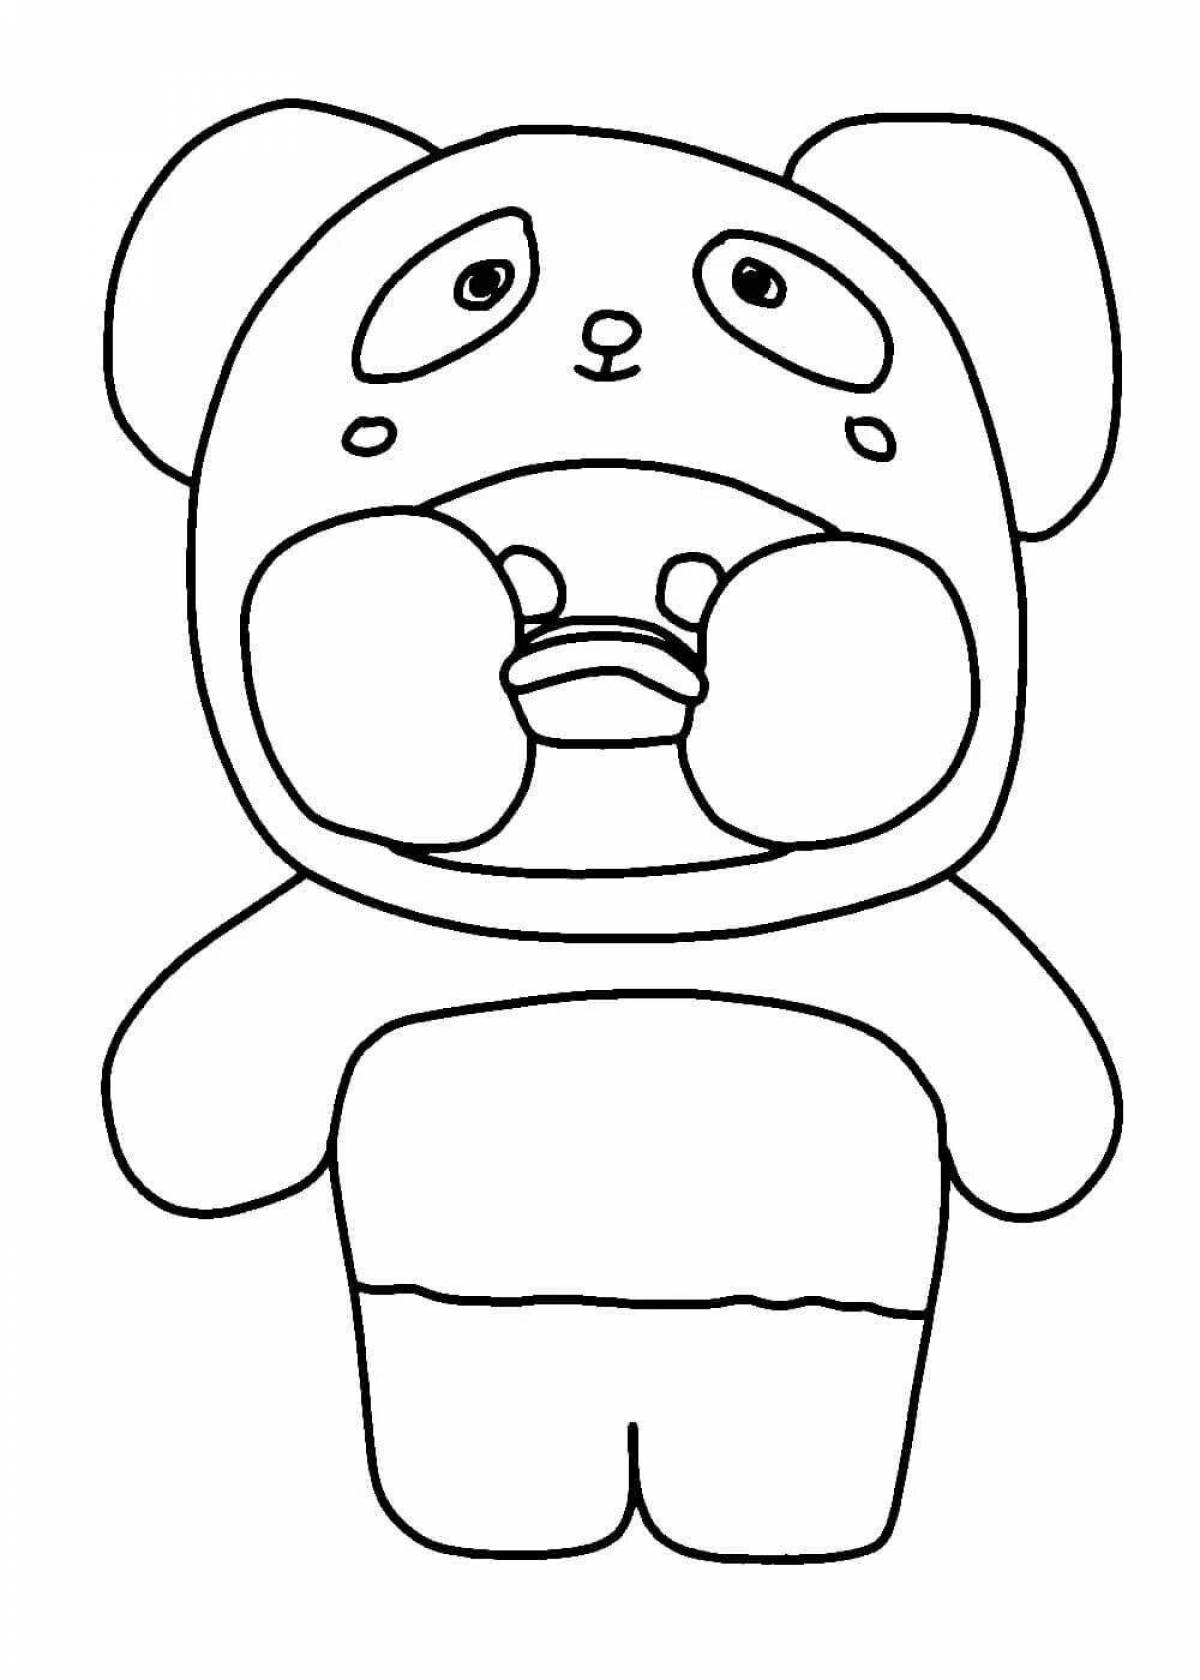 Lalafangfan duck coloring page